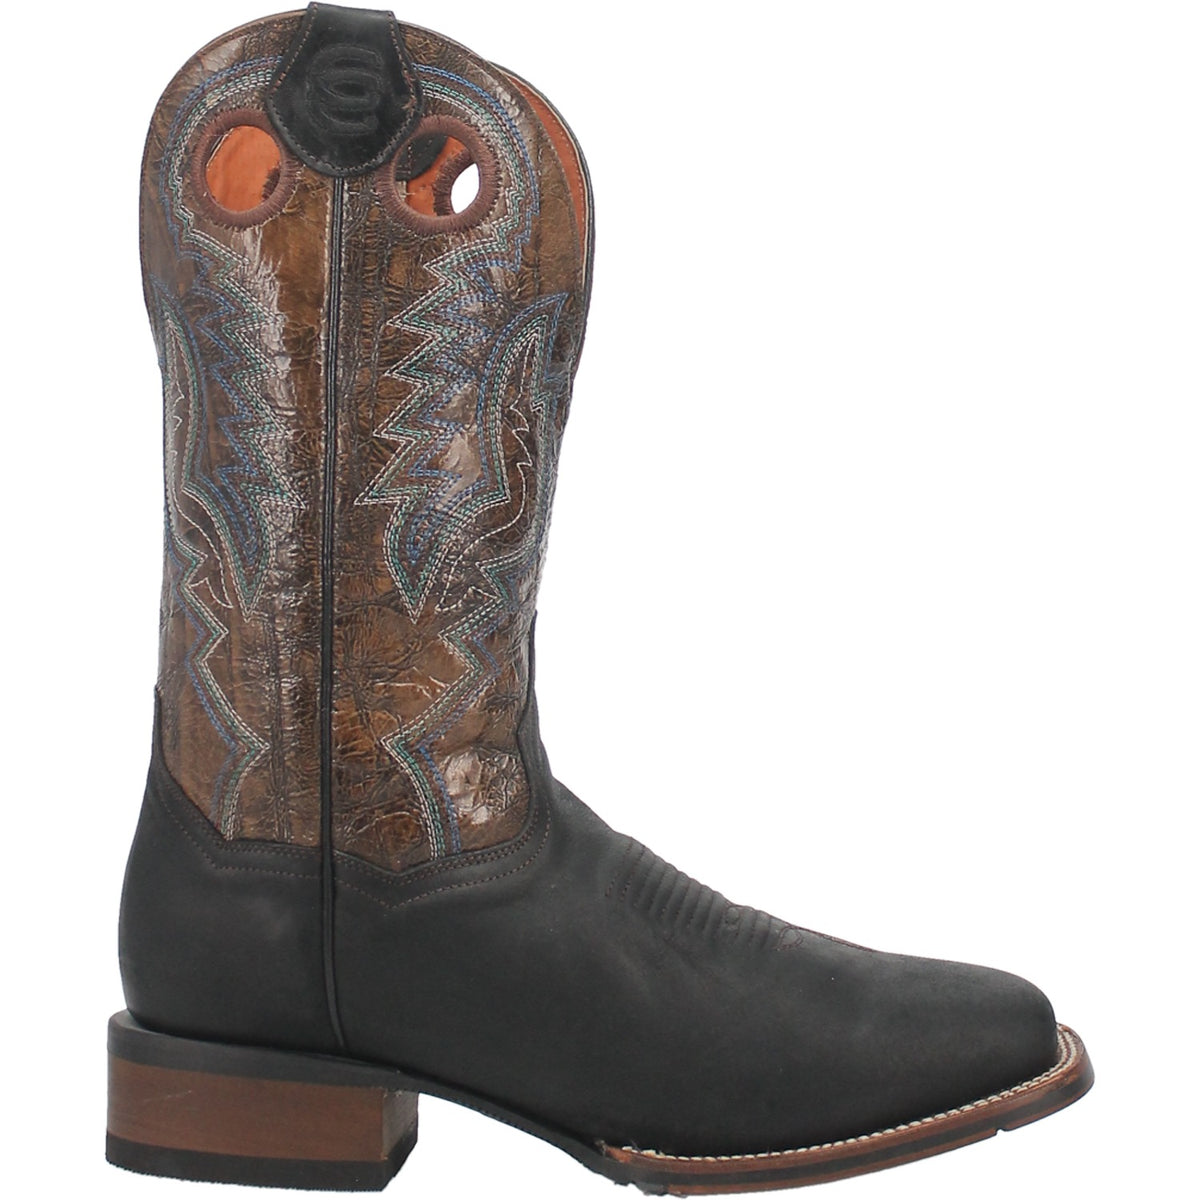 DEUCE LEATHER BOOT Cover